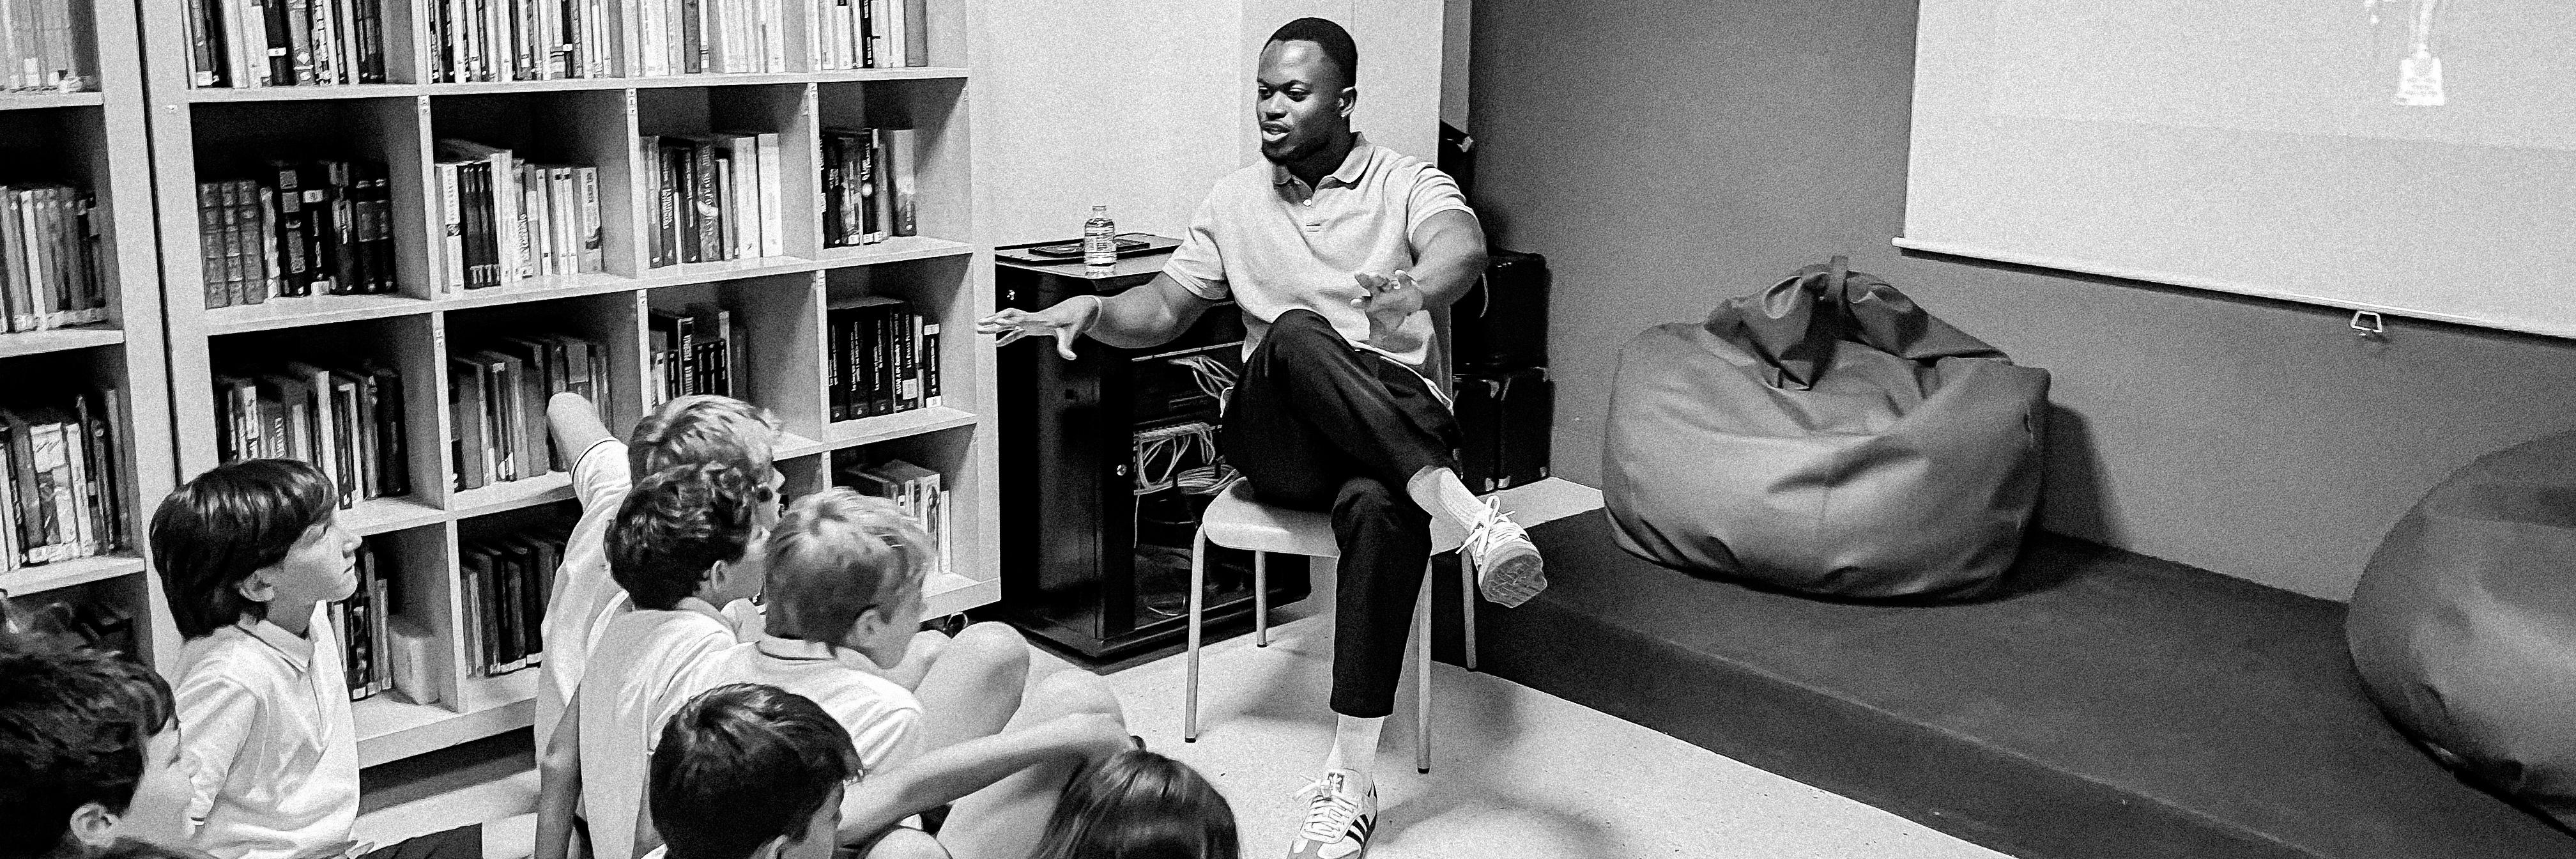 Black and white photo of Michael addressing a group of children in a library